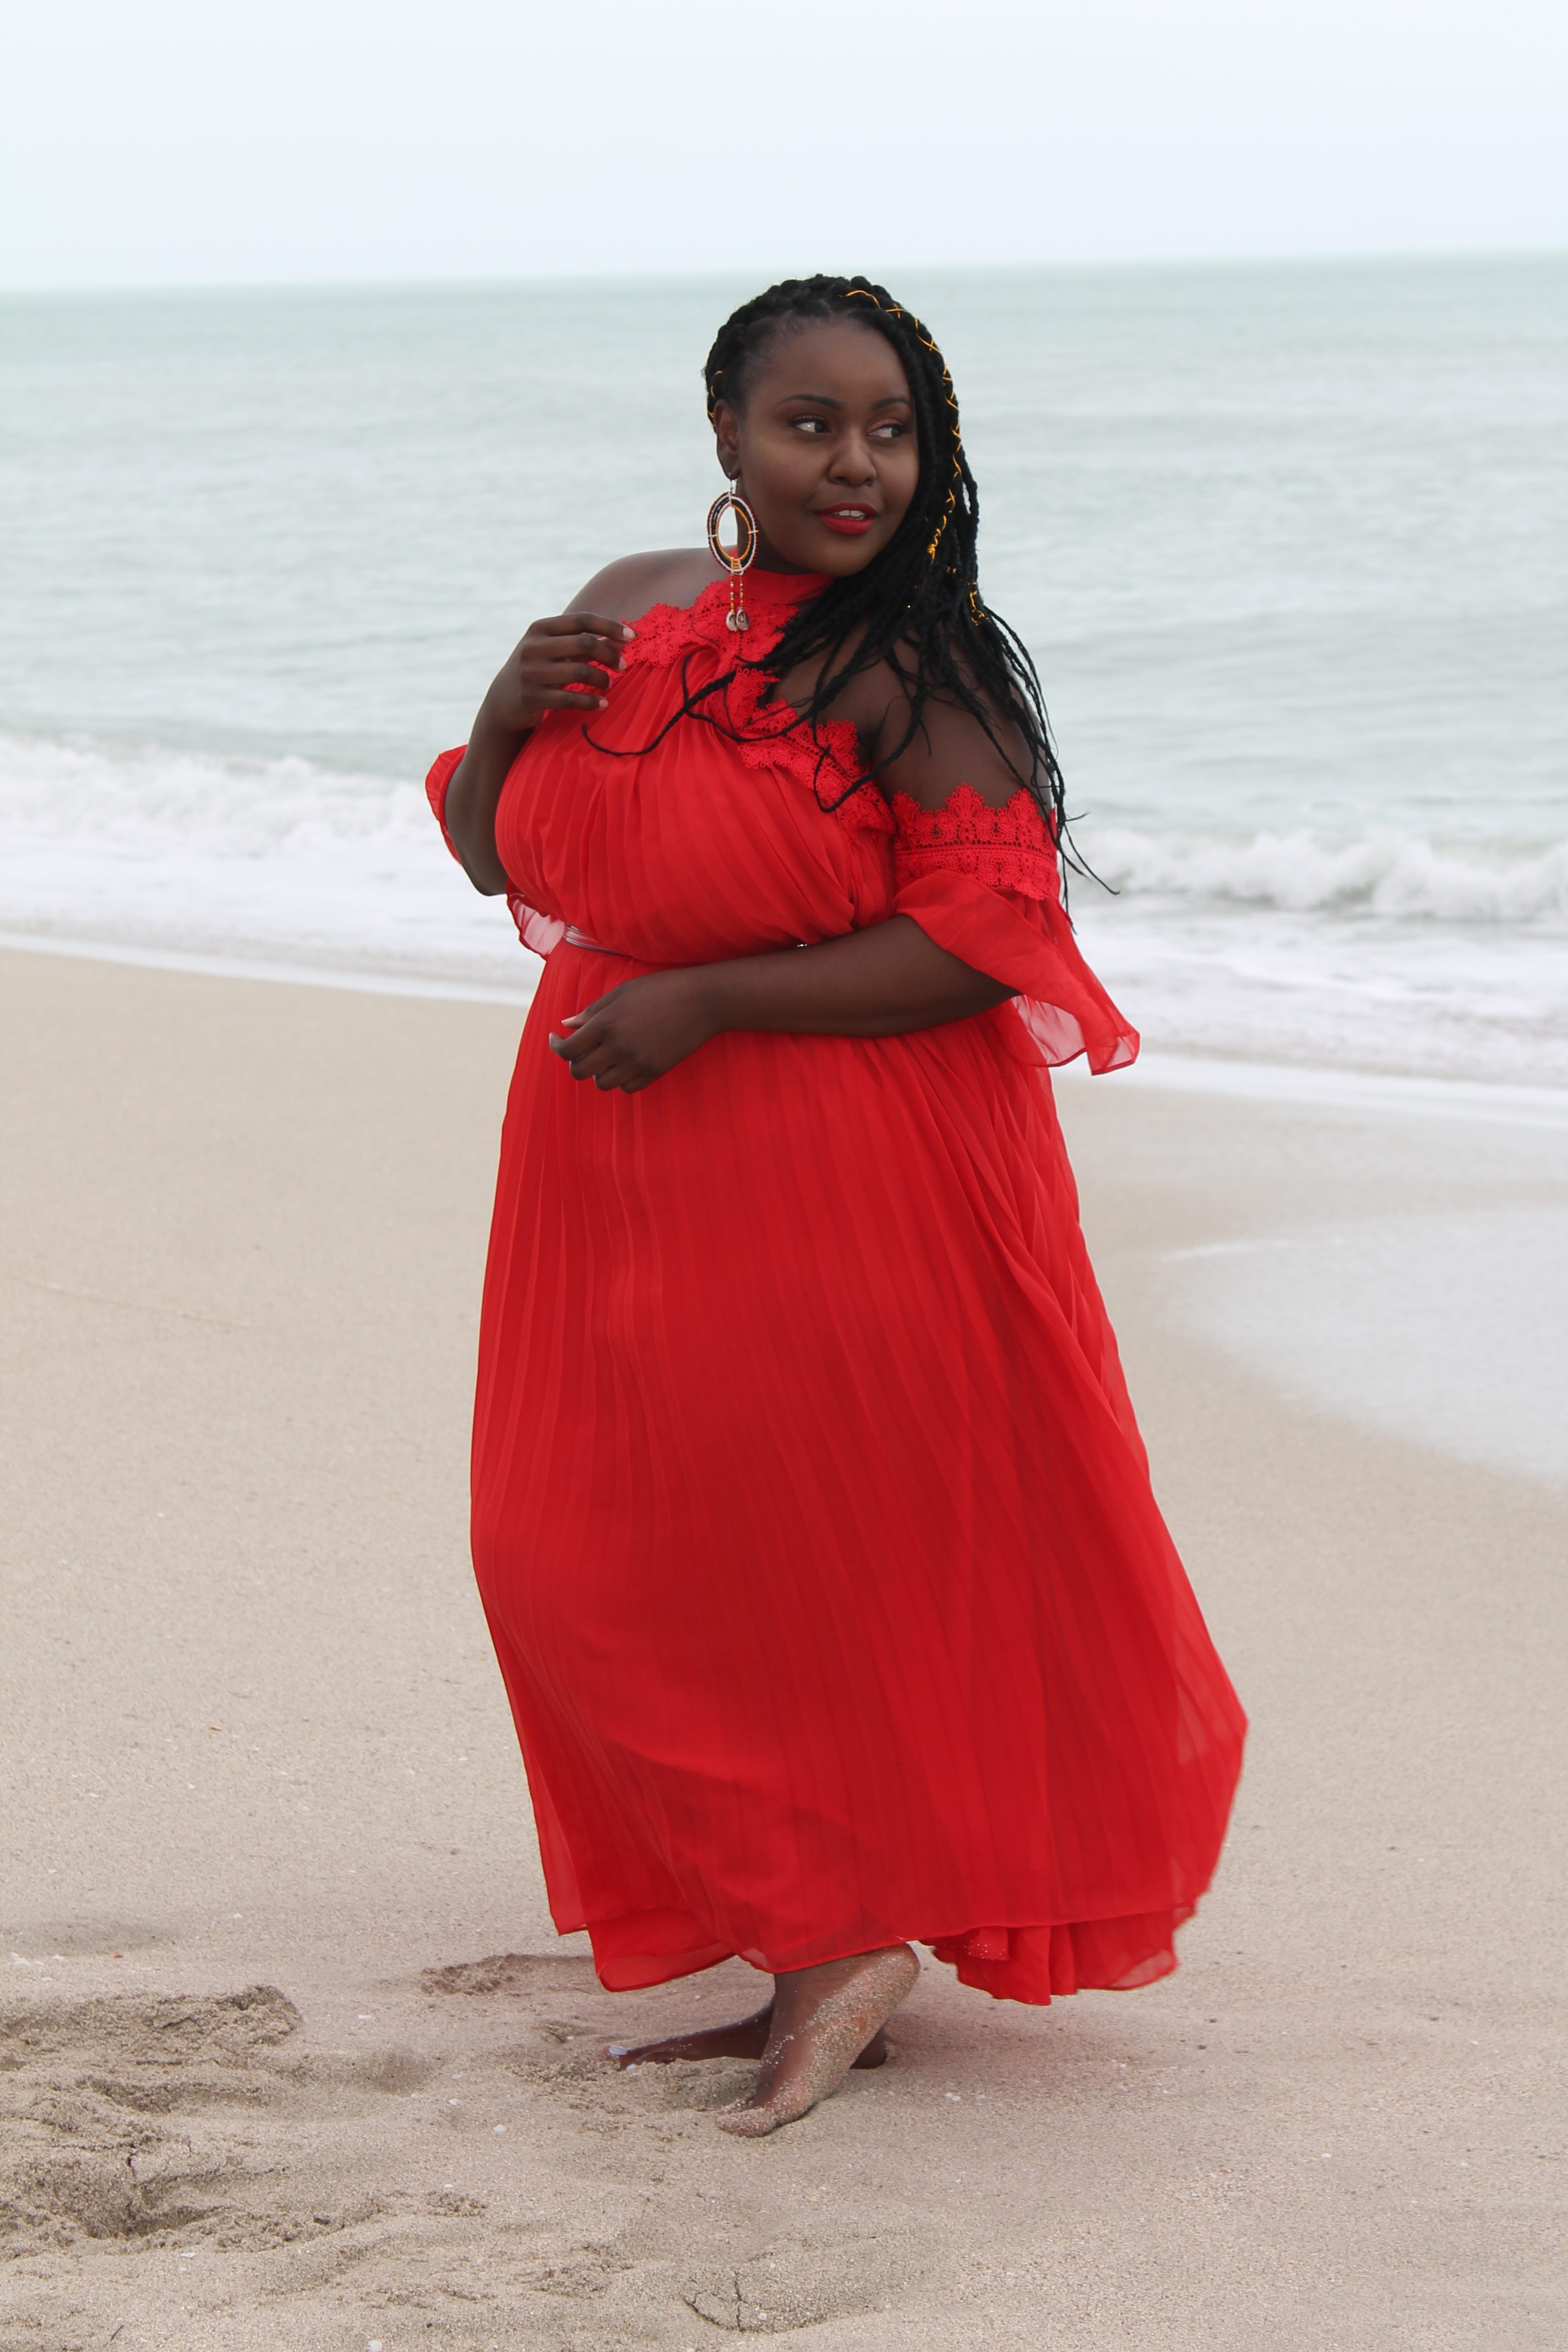 plus size fashion blogs 2017, beautiful curvy girls, how to fill the eye brow of a dark skin, beautiful plus size dark skin girls, plus size black bloggers, clothes for curvy girls, curvy girl fashion clothing, plus blog, plus size fashion tips, plus size women blog, curvy women fashion, plus blog, curvy girl fashion blog, style plus curves, plus size fashion instagram, curvy girl blog, bbw blog, plus size street fashion, plus size beauty blog, plus size fashion ideas, curvy girl summer outfits, plus size fashion magazine, plus fashion bloggers, boohoo, rebdolls bodycon maxi dresses, pleated wedding party dress red gown